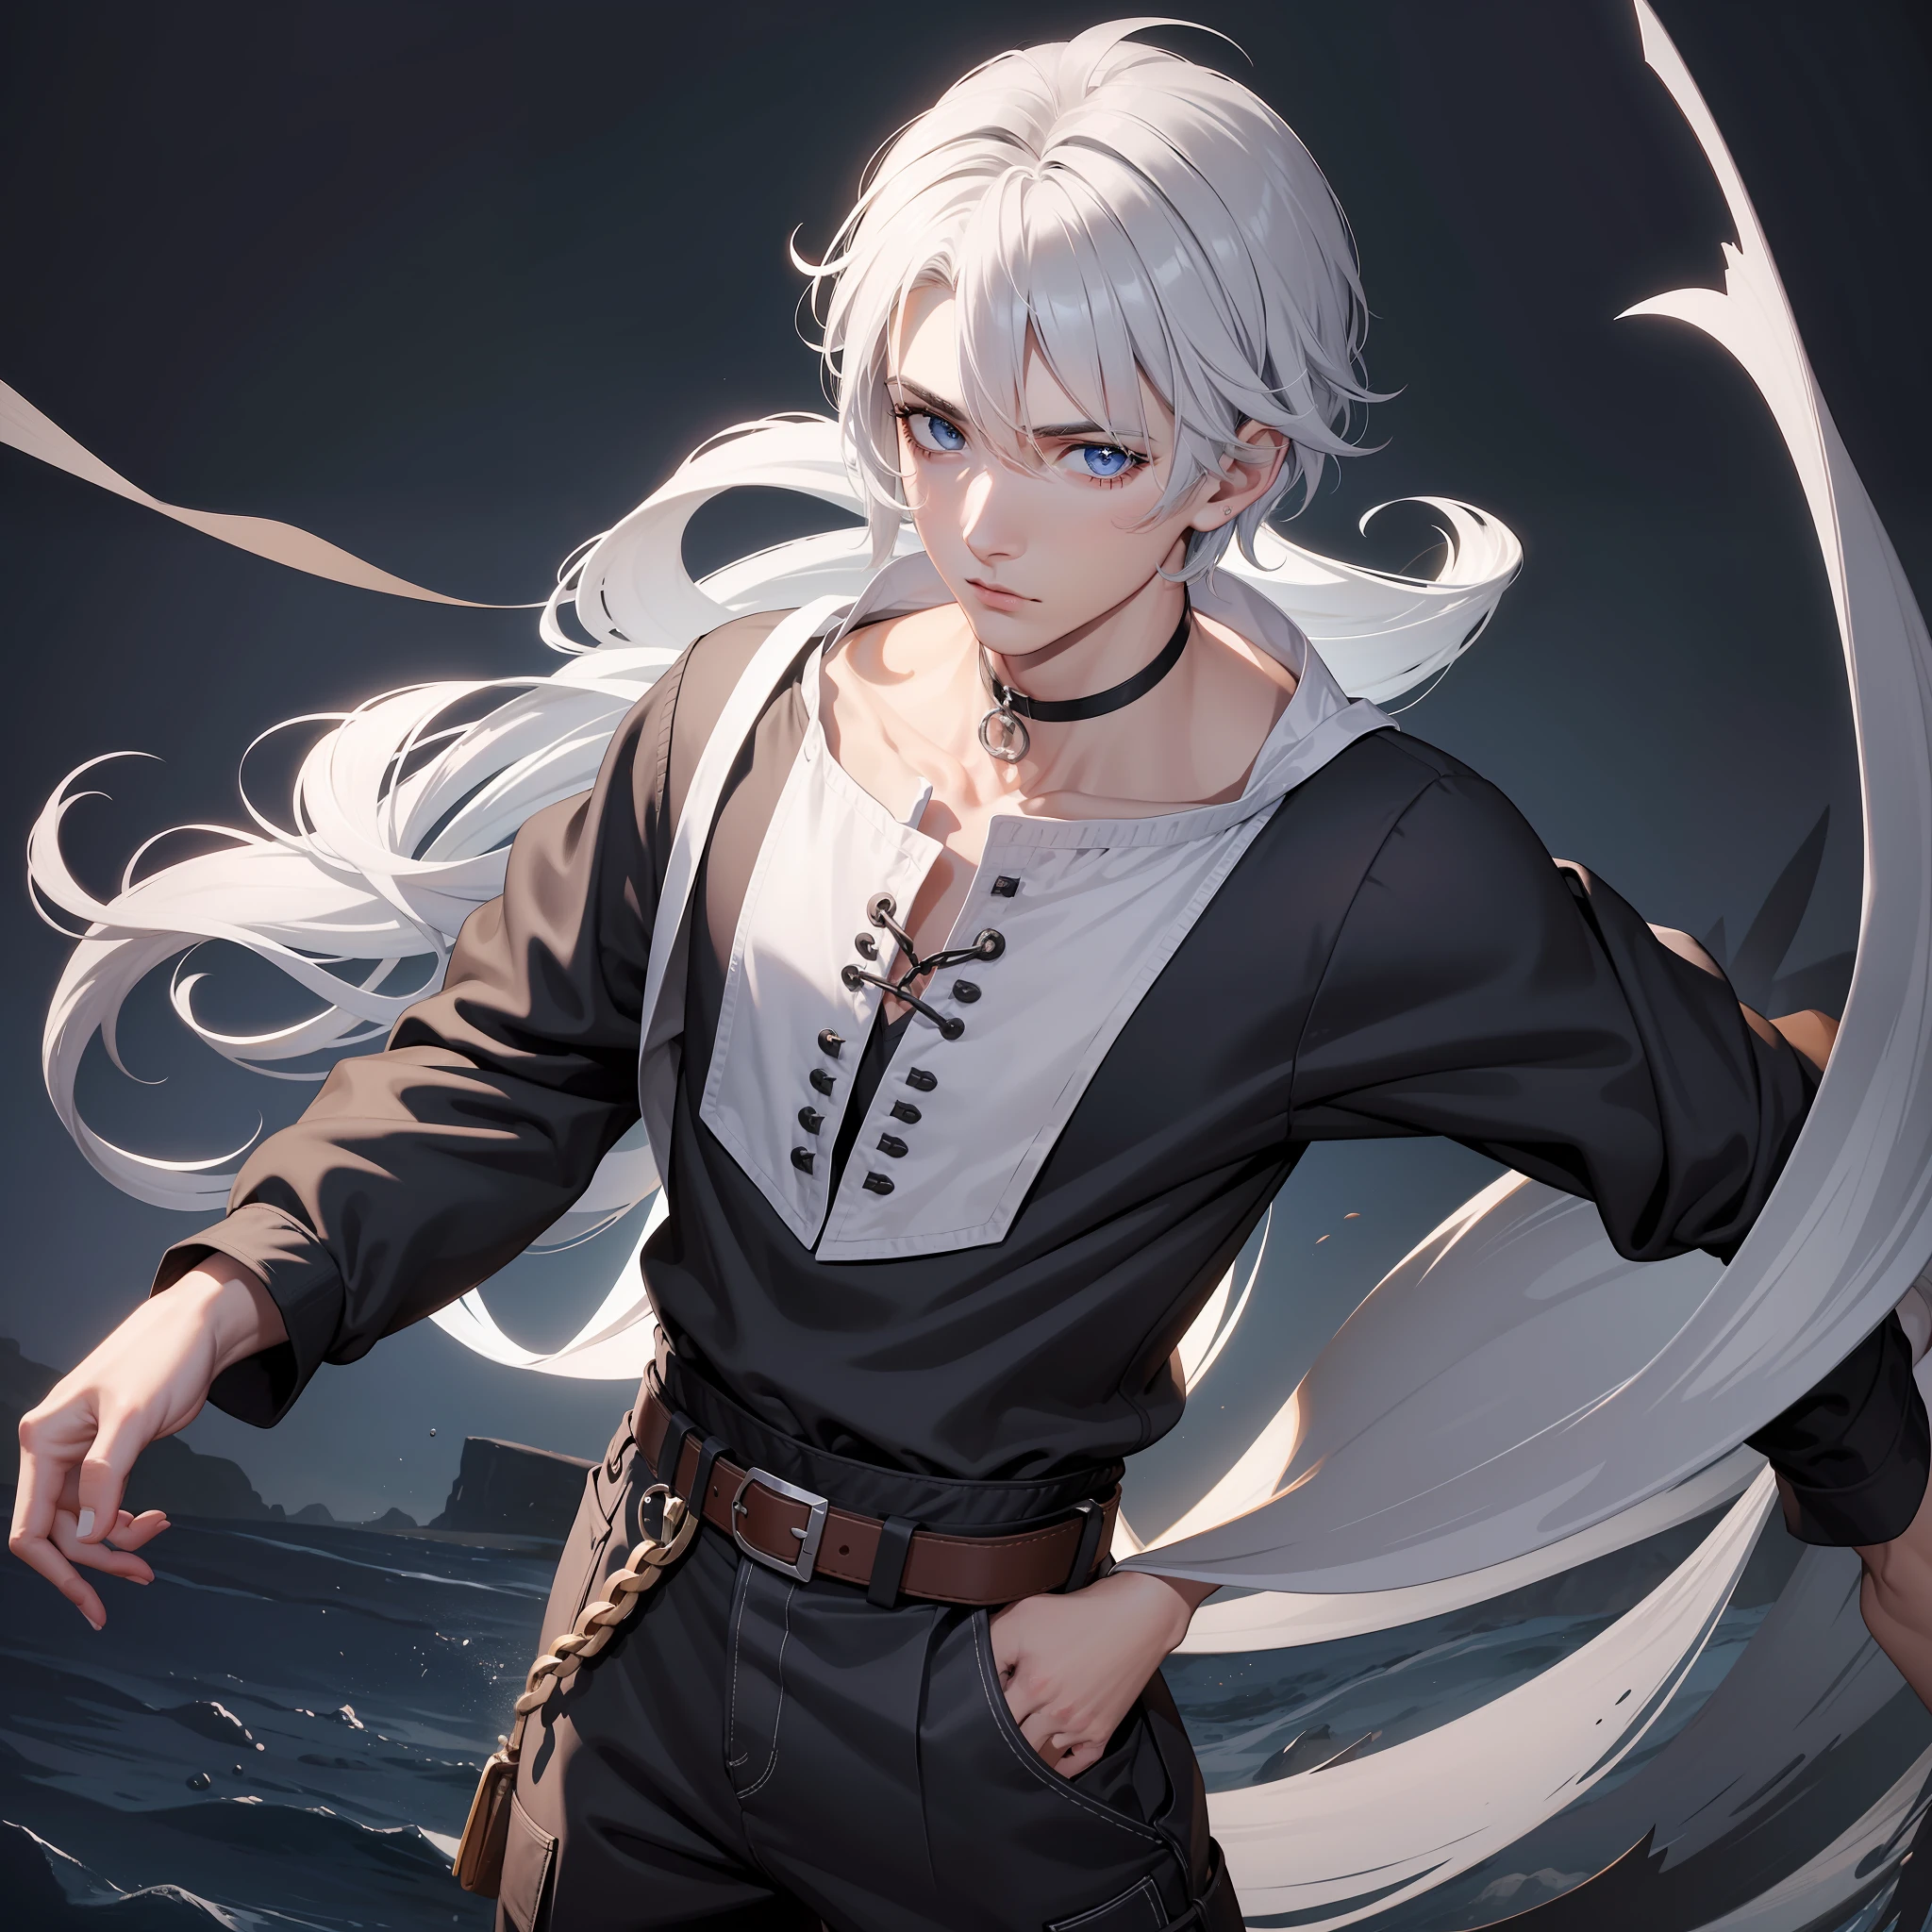 A 23-year-old man with purple eyes and white hair, His clothes are dark and look like a villager's, he has a long sword on the left side of his waist